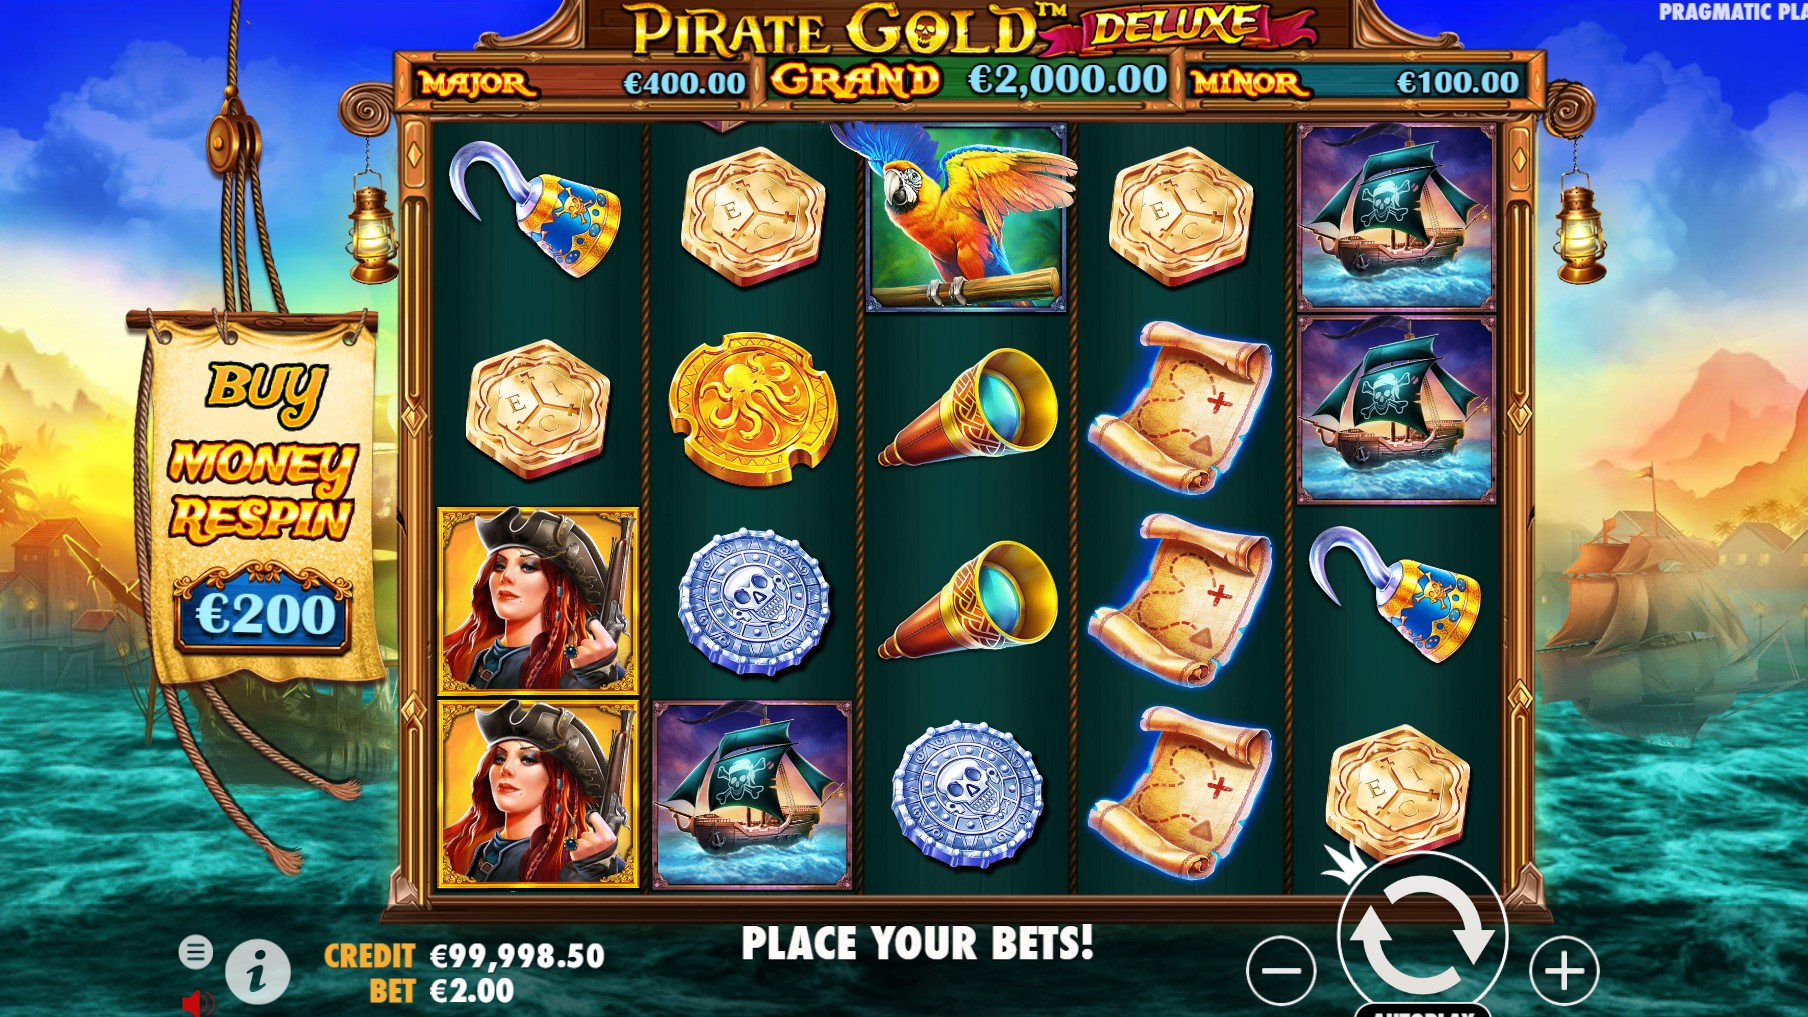 Pirate Gold Deluxe 2 Pragmatic Play